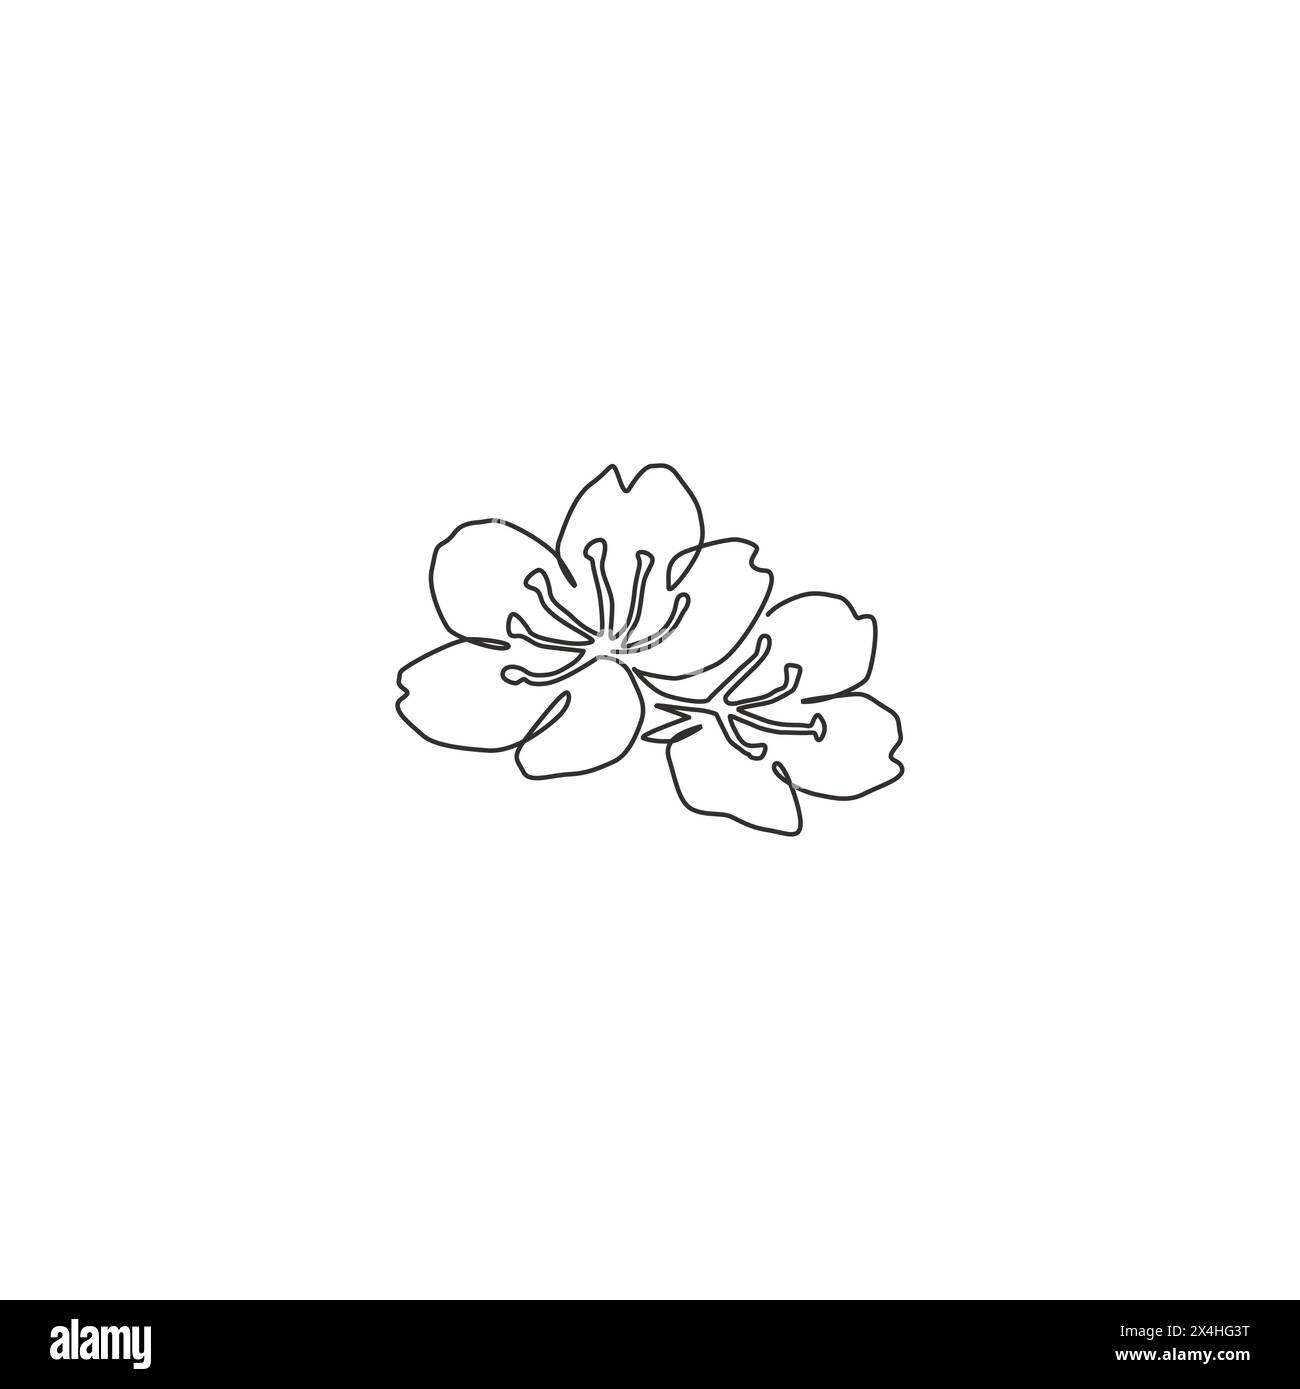 Single continuous line drawing of beauty fresh cherry blossom for home decor wall art poster print. Printable decorative sakura flower for greeting ca Stock Vector